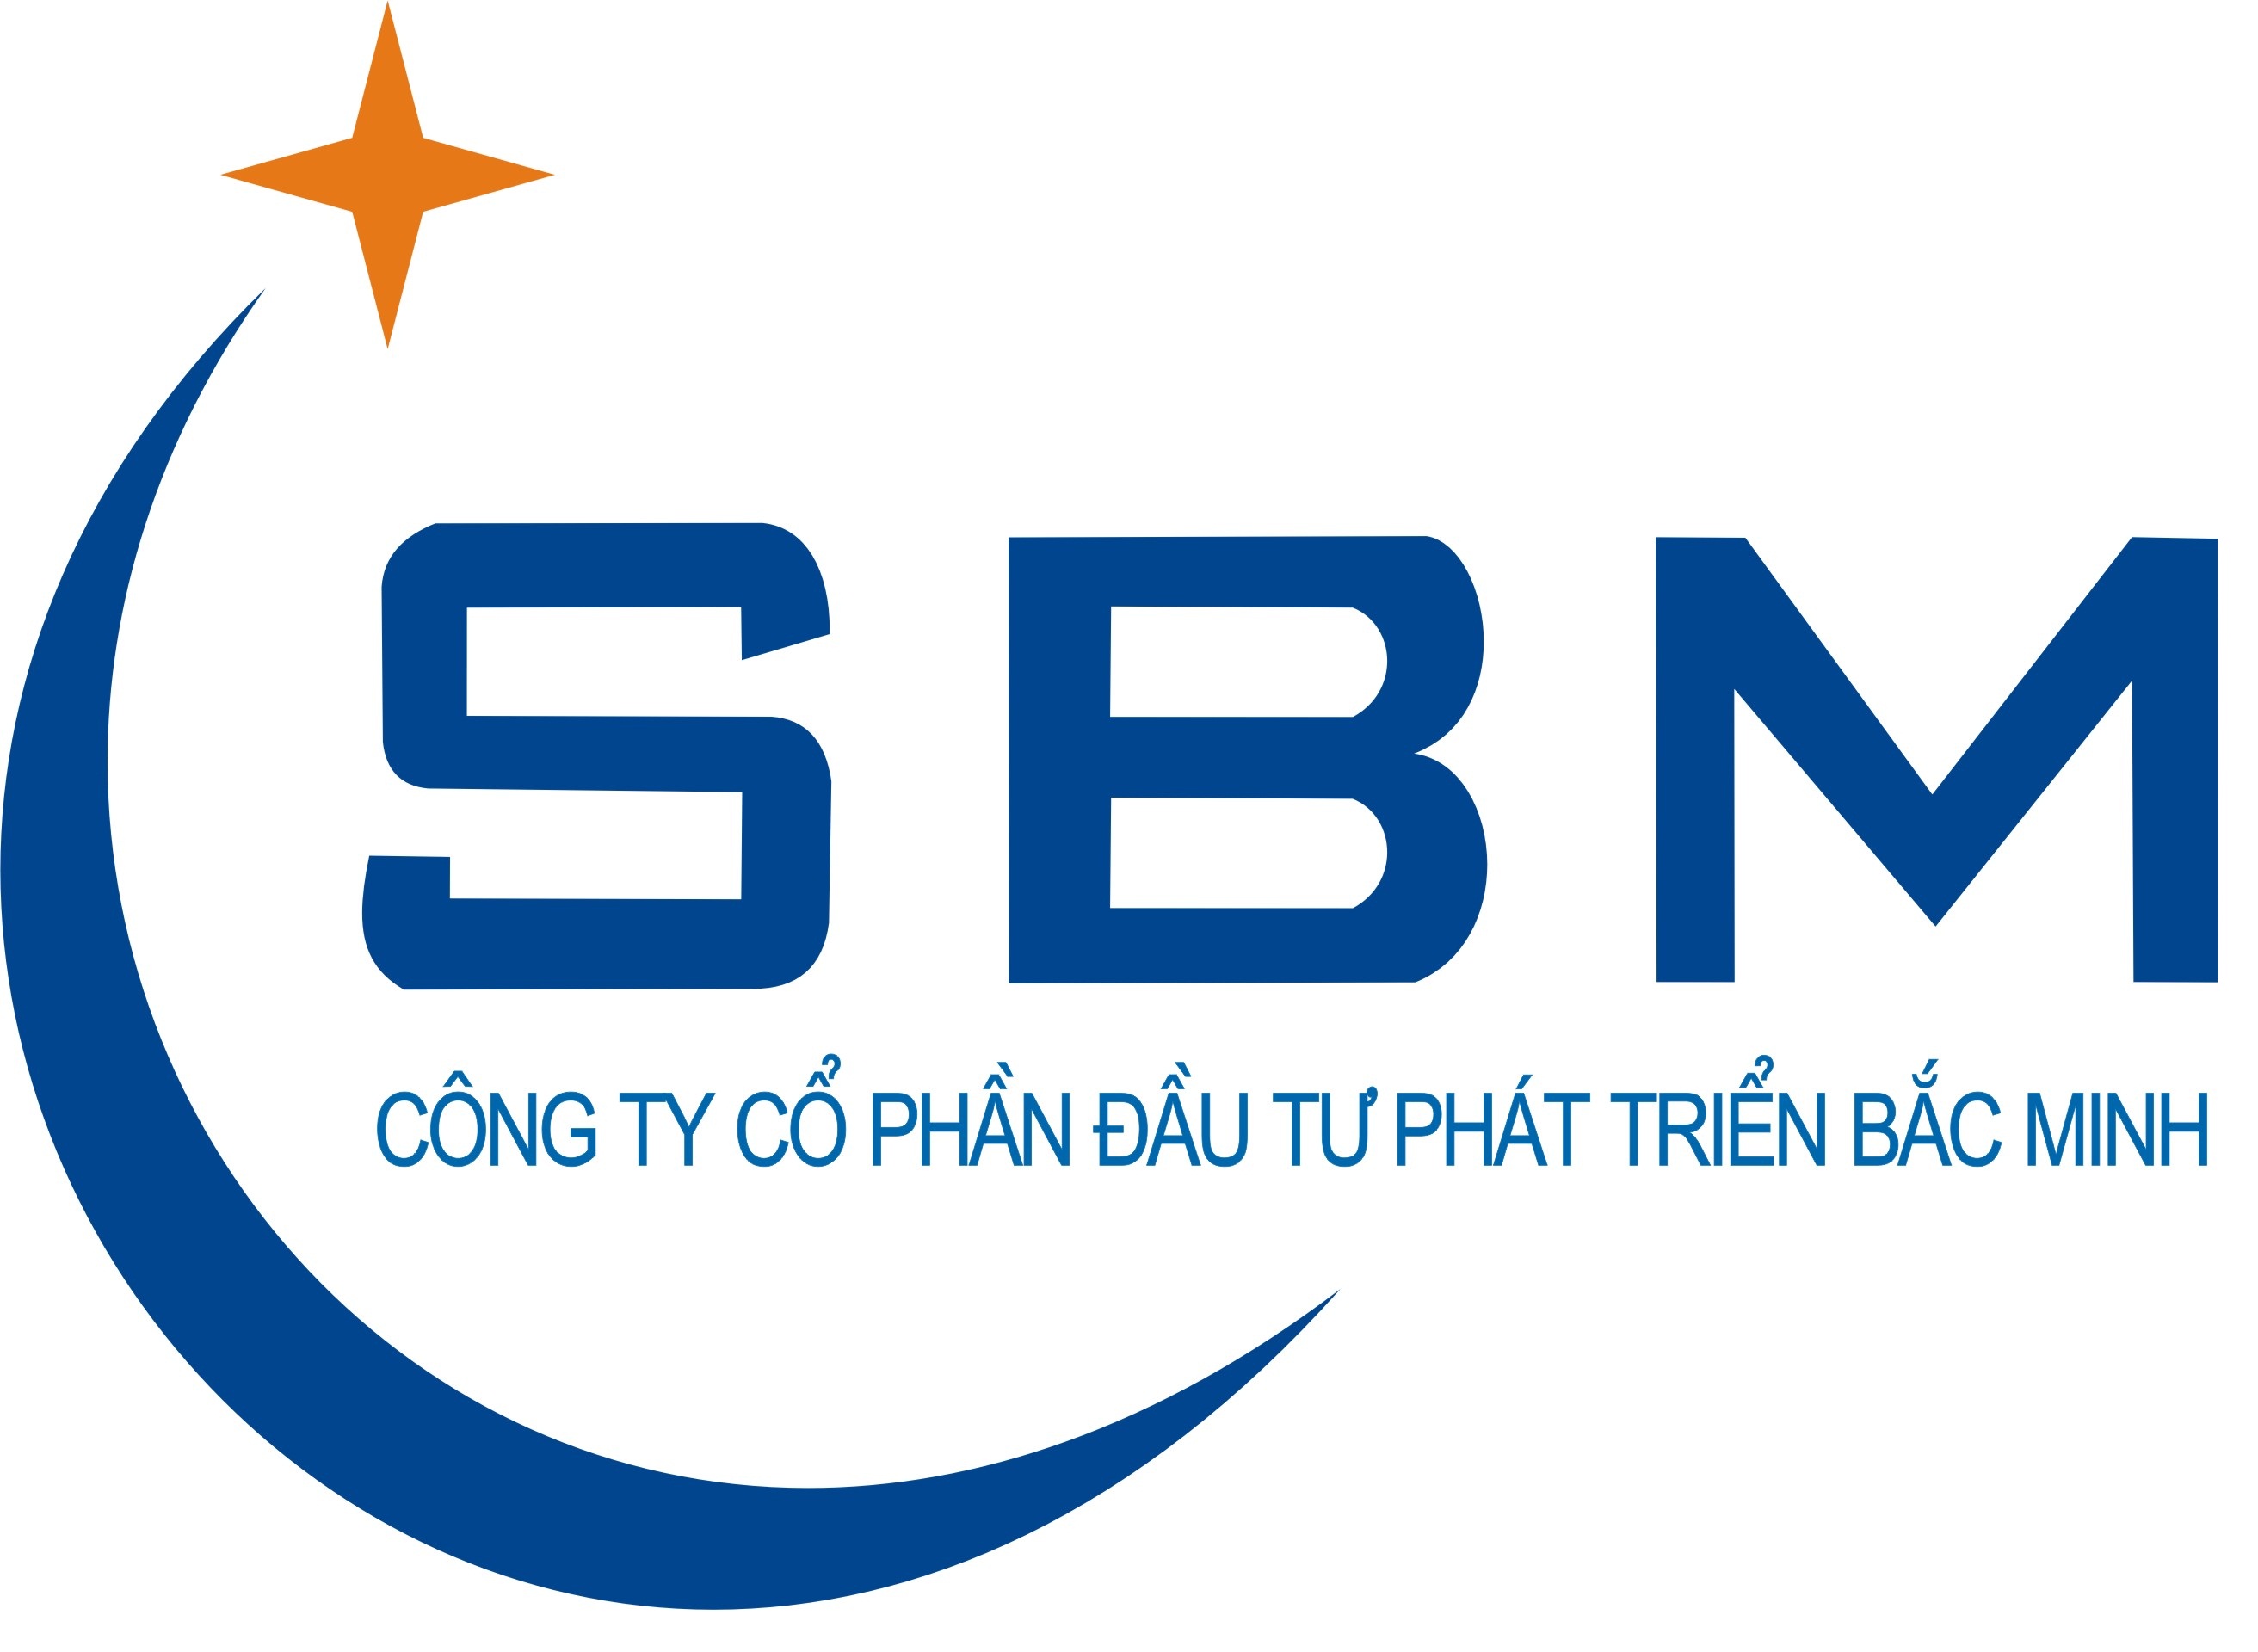 Bac Minh Development Investment Joint Stock Company